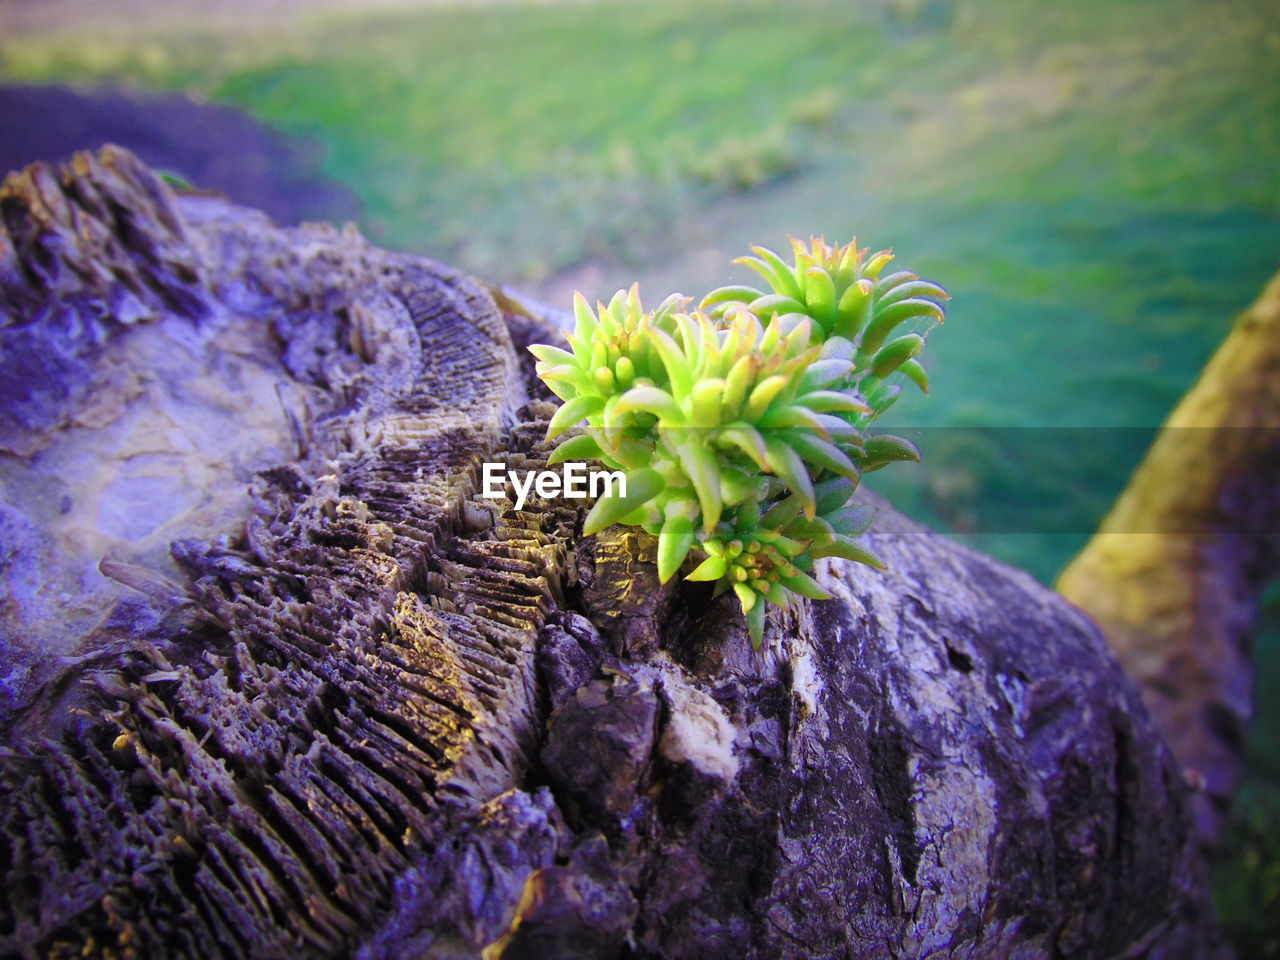 CLOSE-UP OF PLANT GROWING ON ROCKS